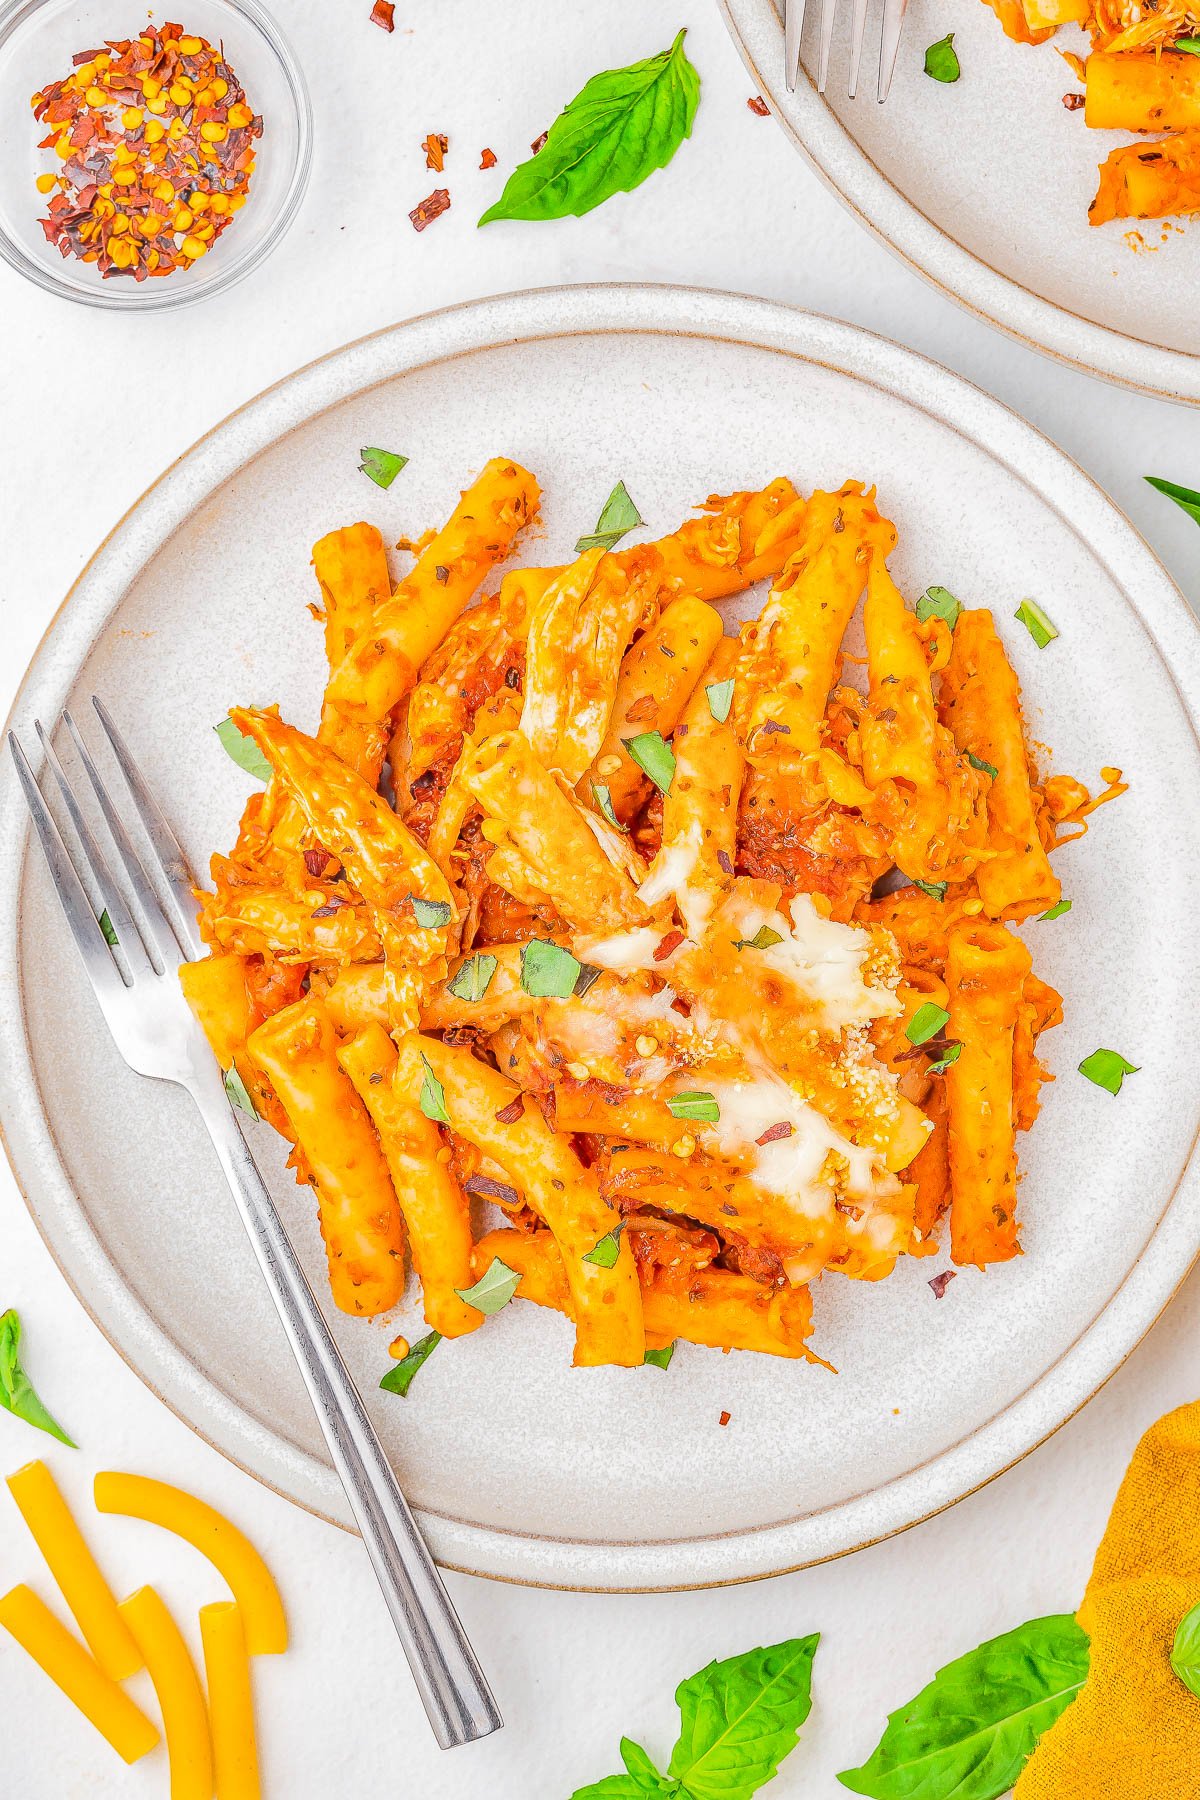 Baked Ziti with Chicken — A FAST and EASY pasta bake made with al dente ziti, juicy chicken, marinara sauce, and two types of CHEESE for the ultimate comfort food casserole! Ready in 45 minutes, perfect for weeknight dinners or casual family get-togethers, and picky eater approved! Use pasta that's in your pantry, a jar of marinara, rotisserie chicken, cheese, and you're set - nothing too fancy or complicated here and planned leftovers are a bonus!